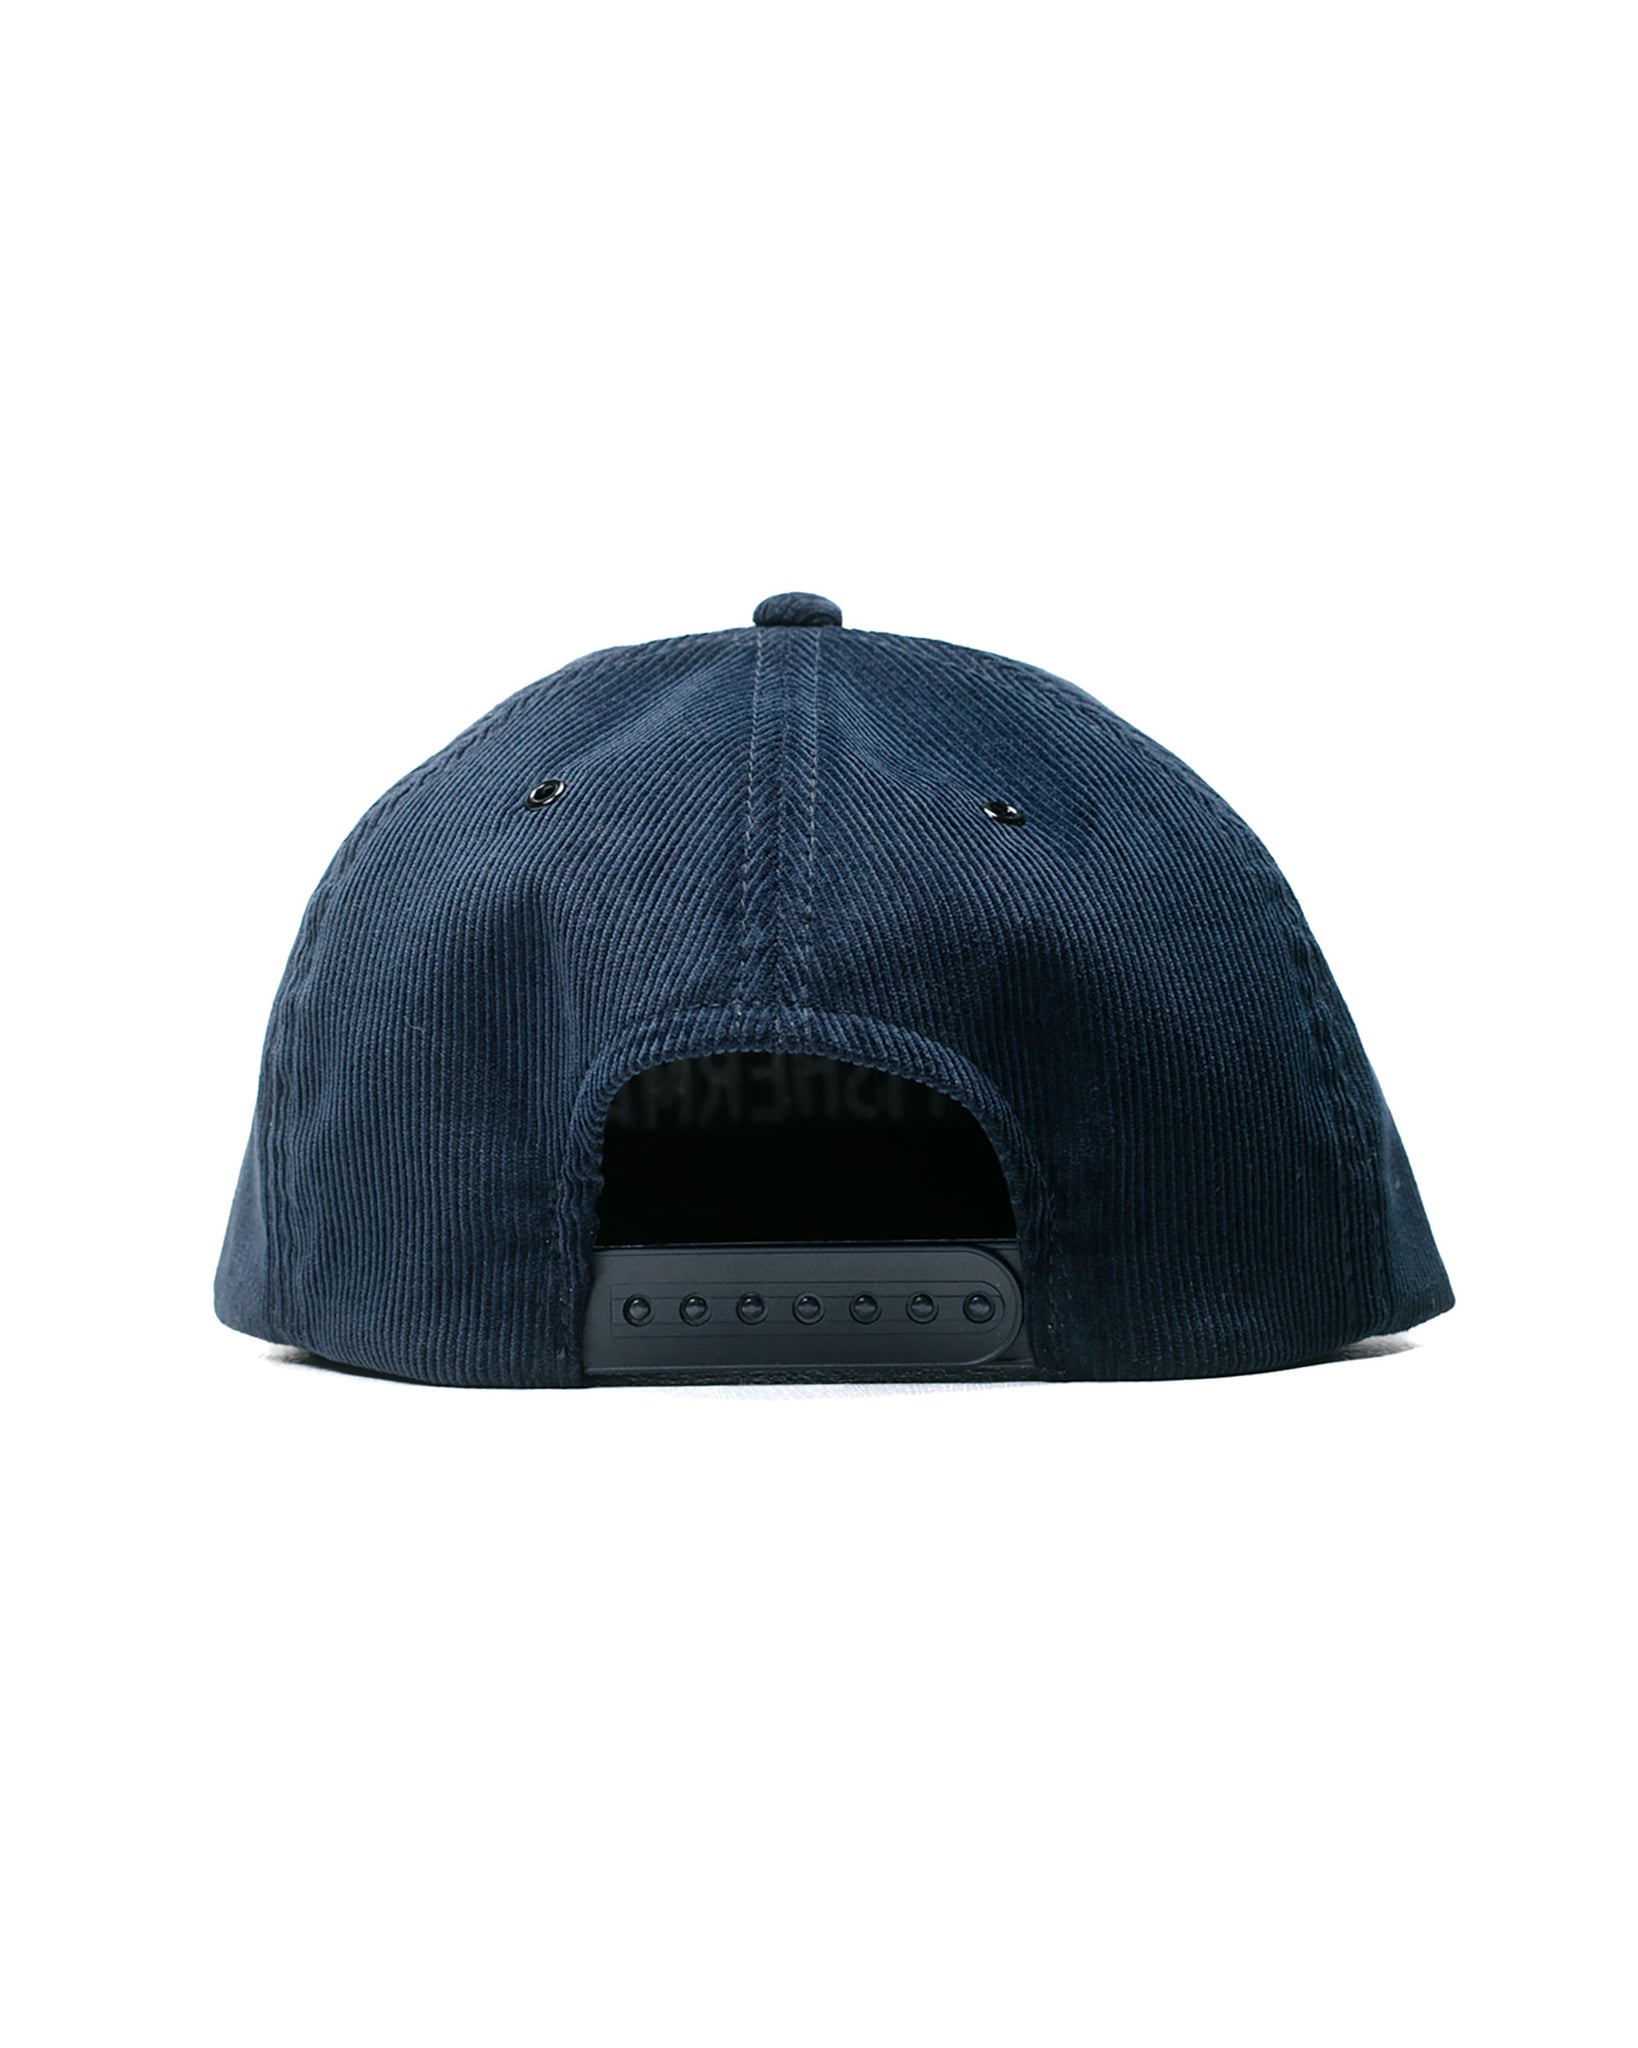 The Real McCoy's MA23109 Five Panel Corduroy Cap / #1 Fishing Dad Navy